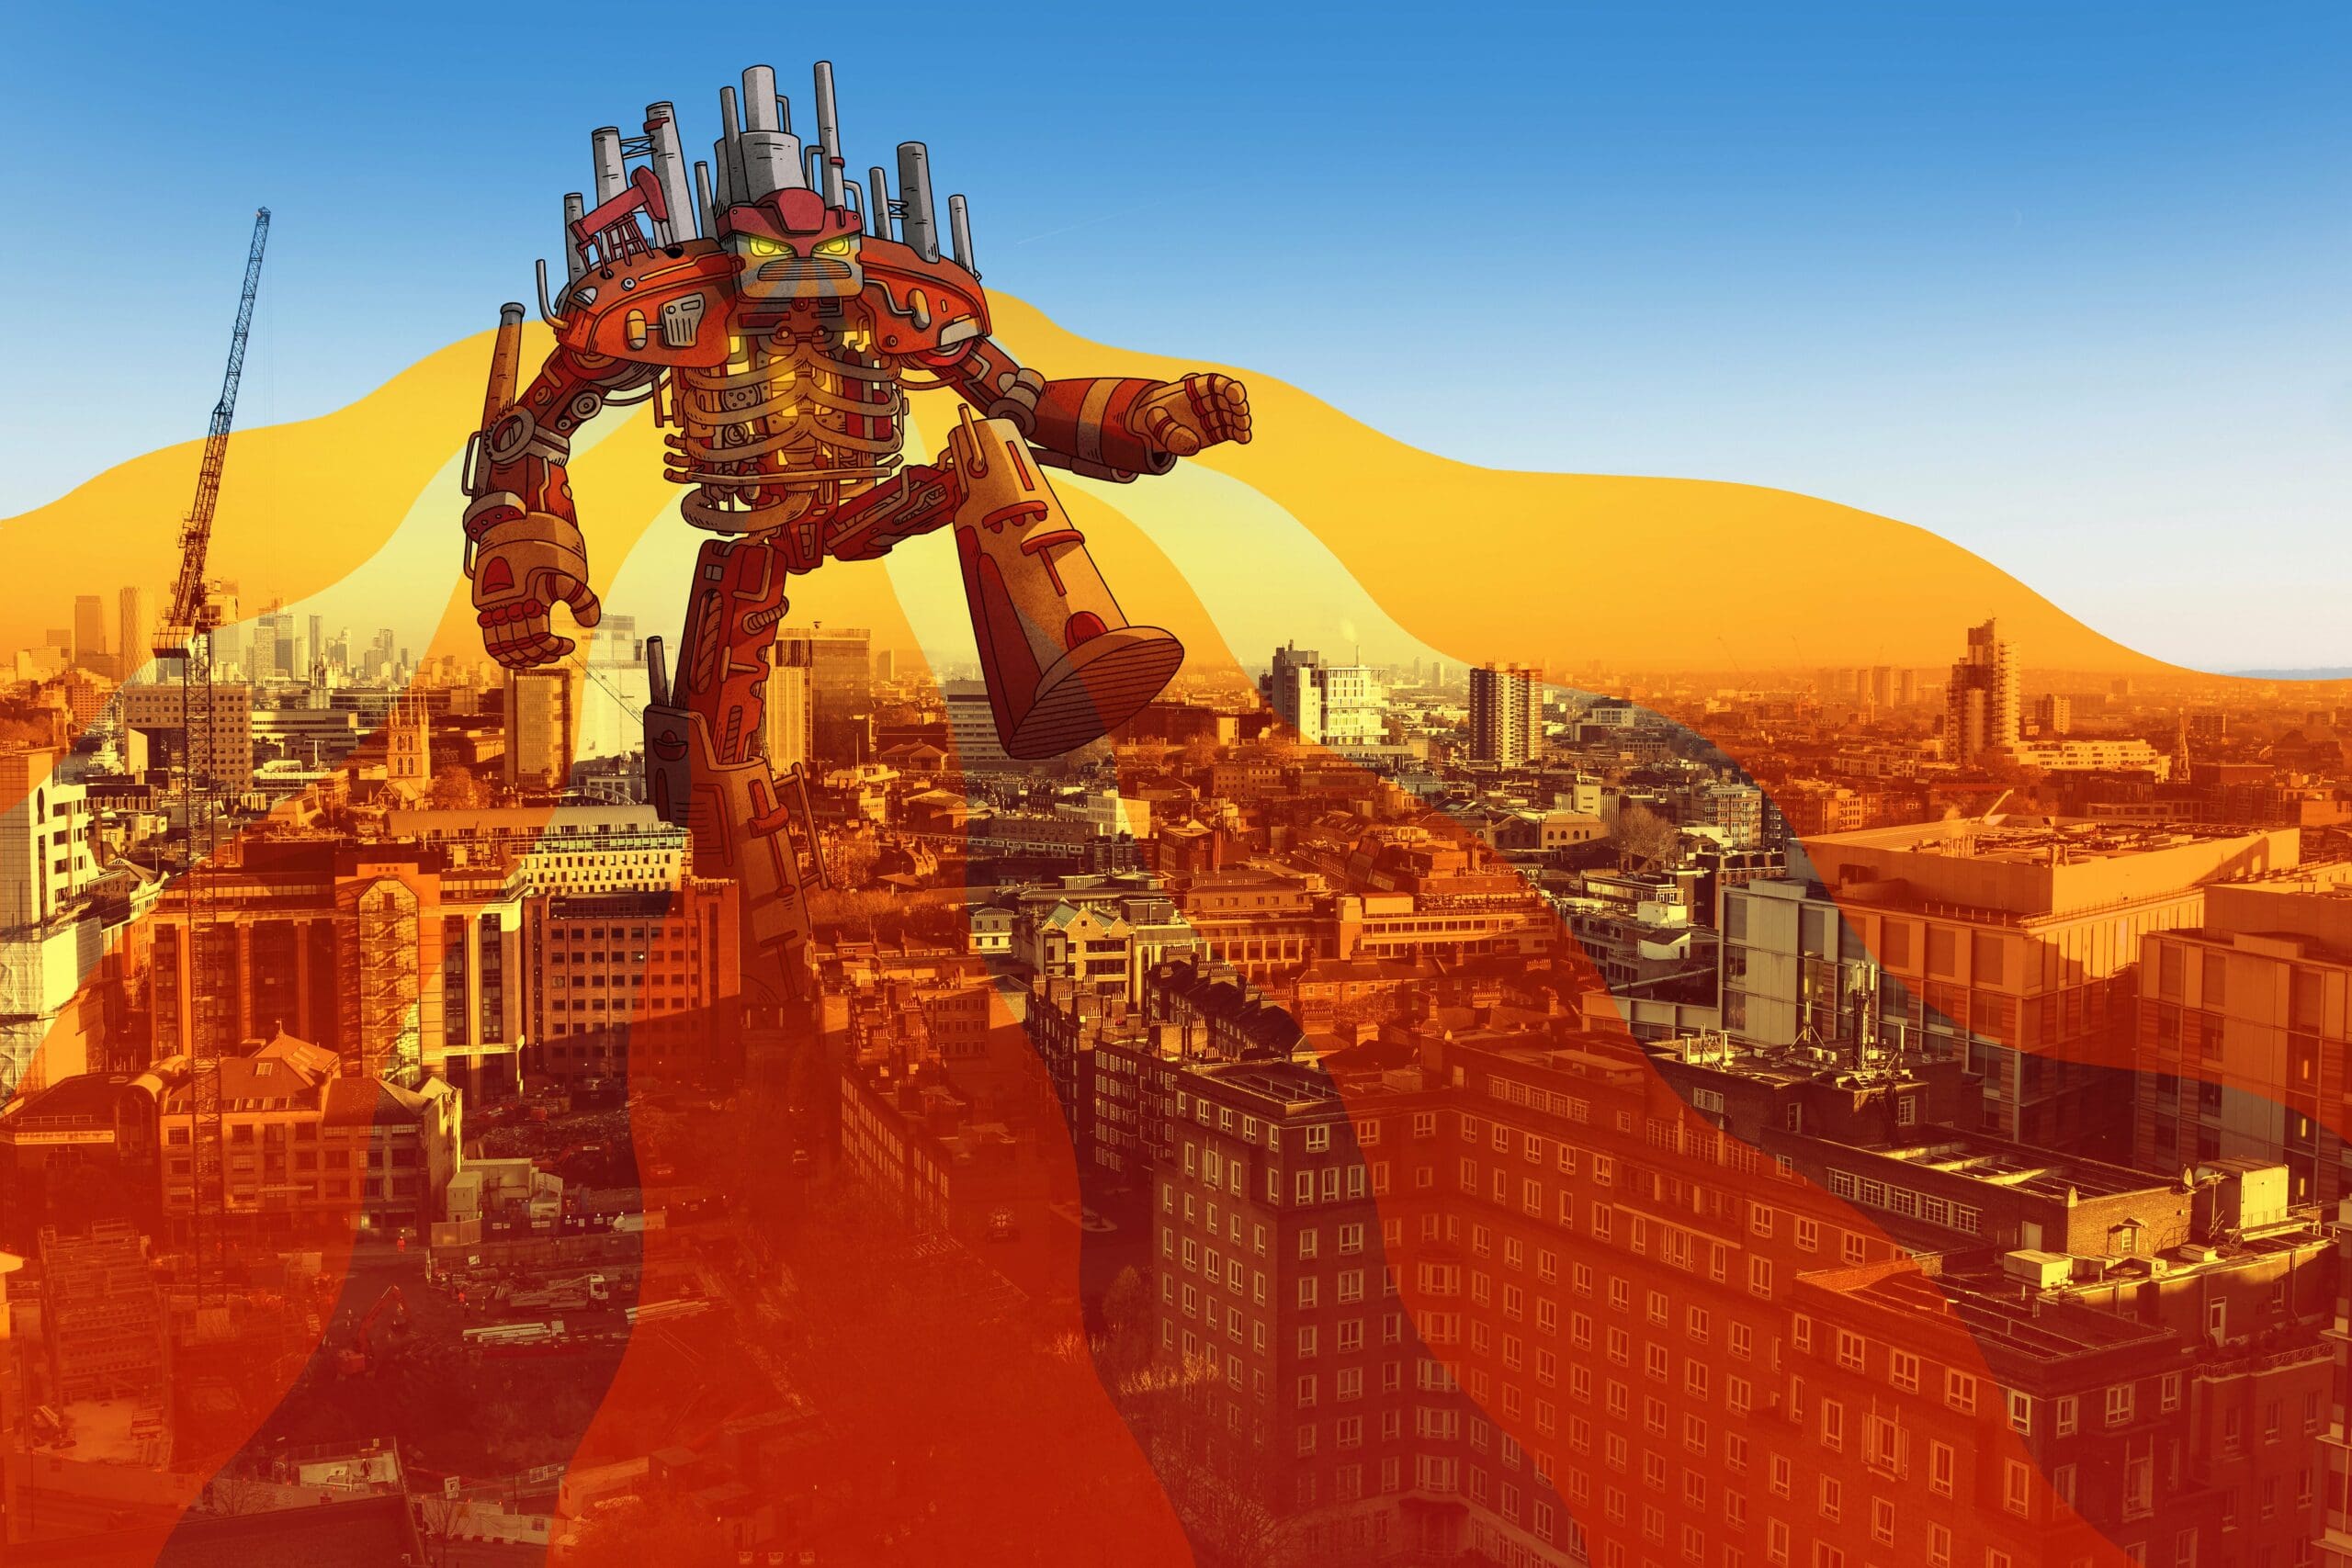 Heat Robot Over London Artwork - developed by the artists Andrew Rae and Ruskin Kyle, both UK-based. These were developed as campaign materials for Heat Action Day.